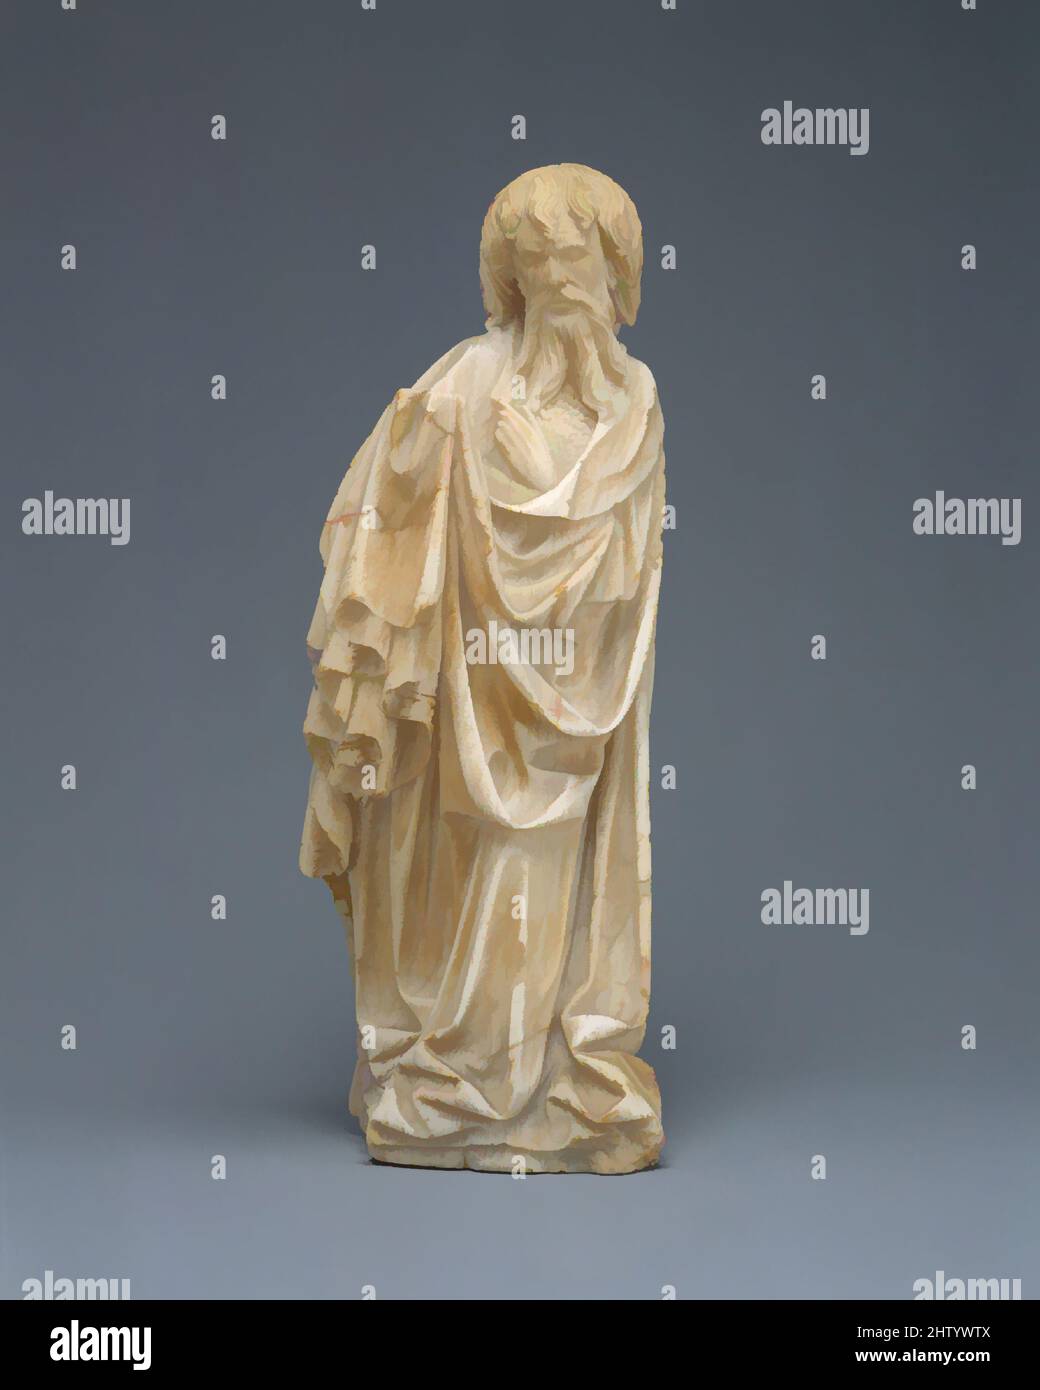 Art inspired by Saint John the Baptist, ca. 1420–25, South Netherlandish or German, Alabaster, H. 9 7/16 in. (24 cm), Sculpture-Stone, This figure of John the Baptist is a particularly accomplished example of alabaster carving in the first half of the fifteenth century. The original, Classic works modernized by Artotop with a splash of modernity. Shapes, color and value, eye-catching visual impact on art. Emotions through freedom of artworks in a contemporary way. A timeless message pursuing a wildly creative new direction. Artists turning to the digital medium and creating the Artotop NFT Stock Photo